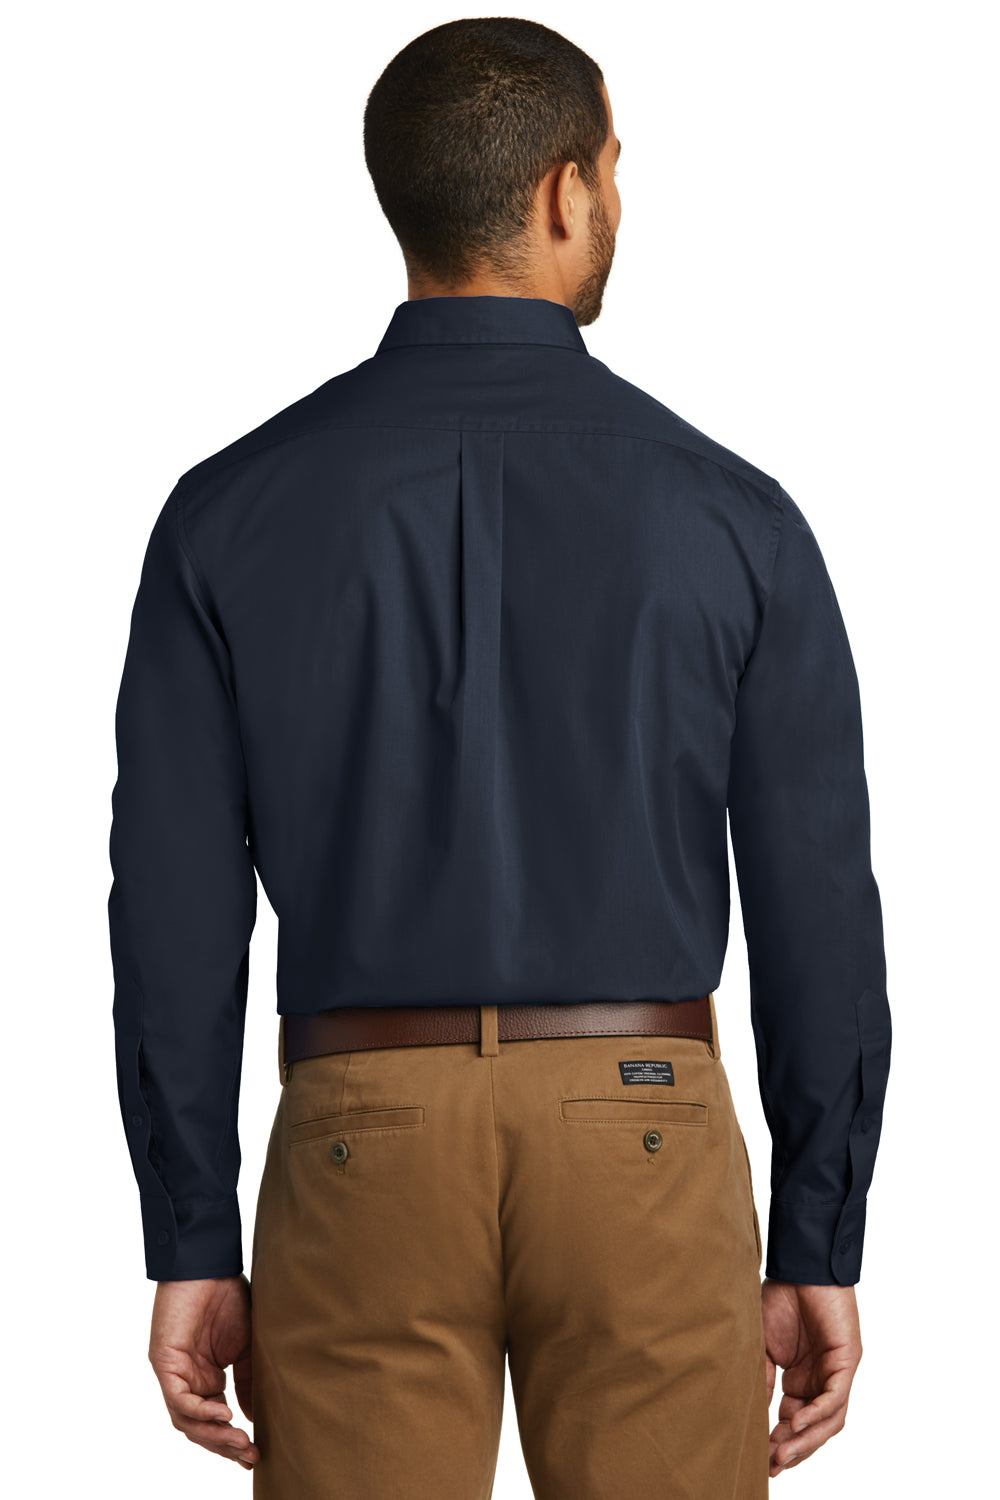 Port Authority W100 Mens Carefree Stain Resistant Long Sleeve Button Down Shirt w/ Pocket Navy Blue Back